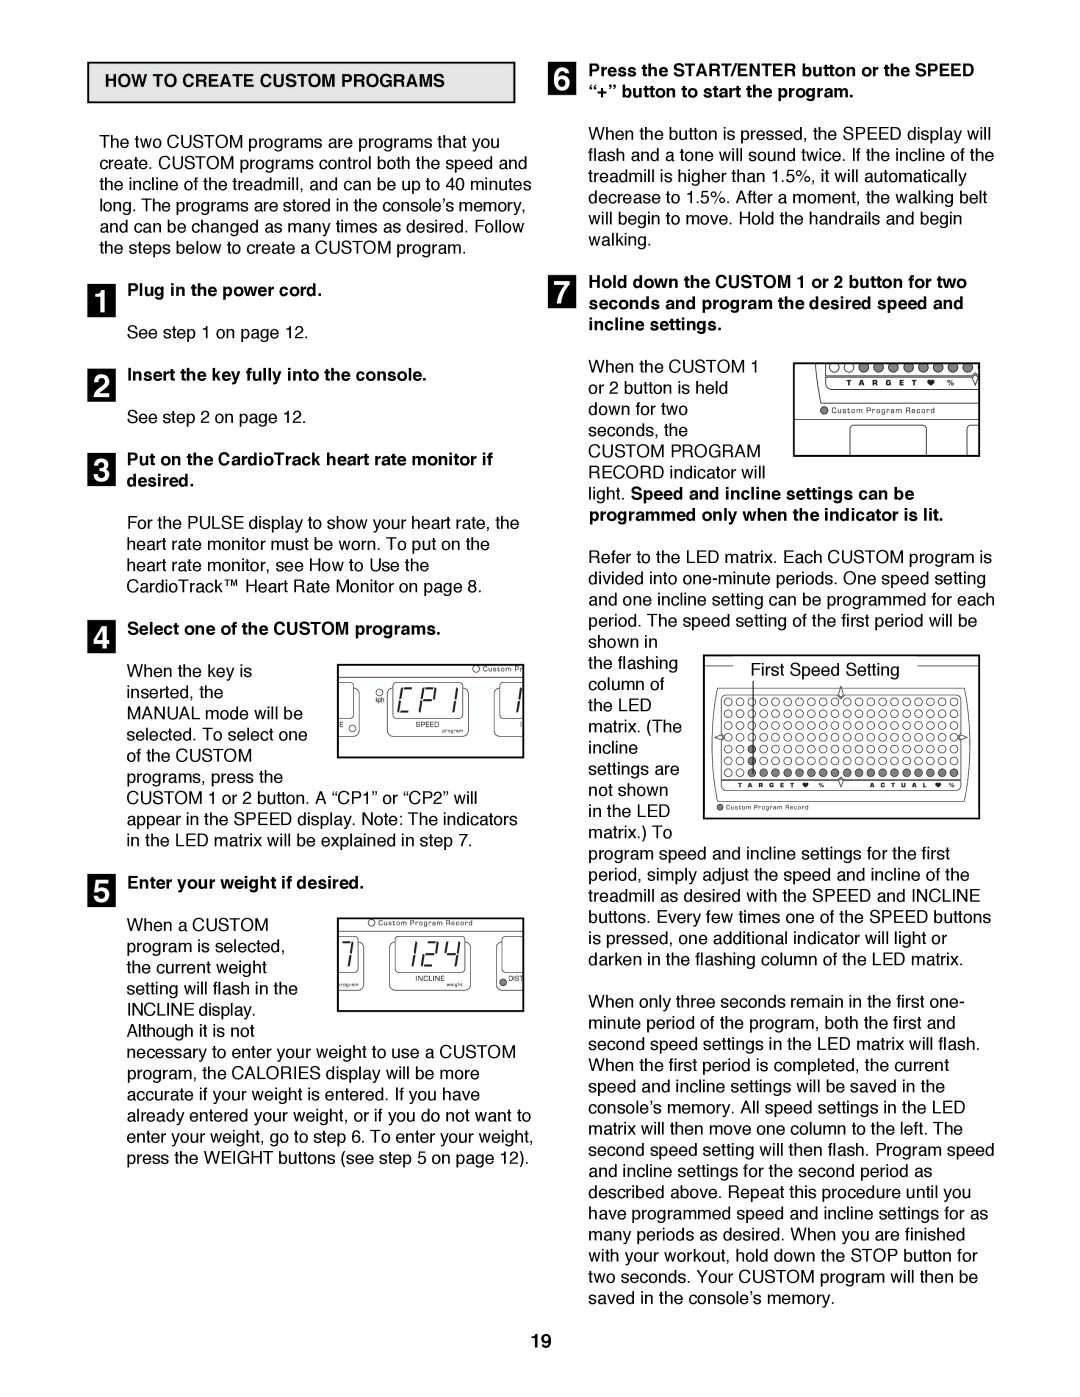 NordicTrack NTTL15083 manual HOW to Create Custom Programs, Select one of the Custom programs 